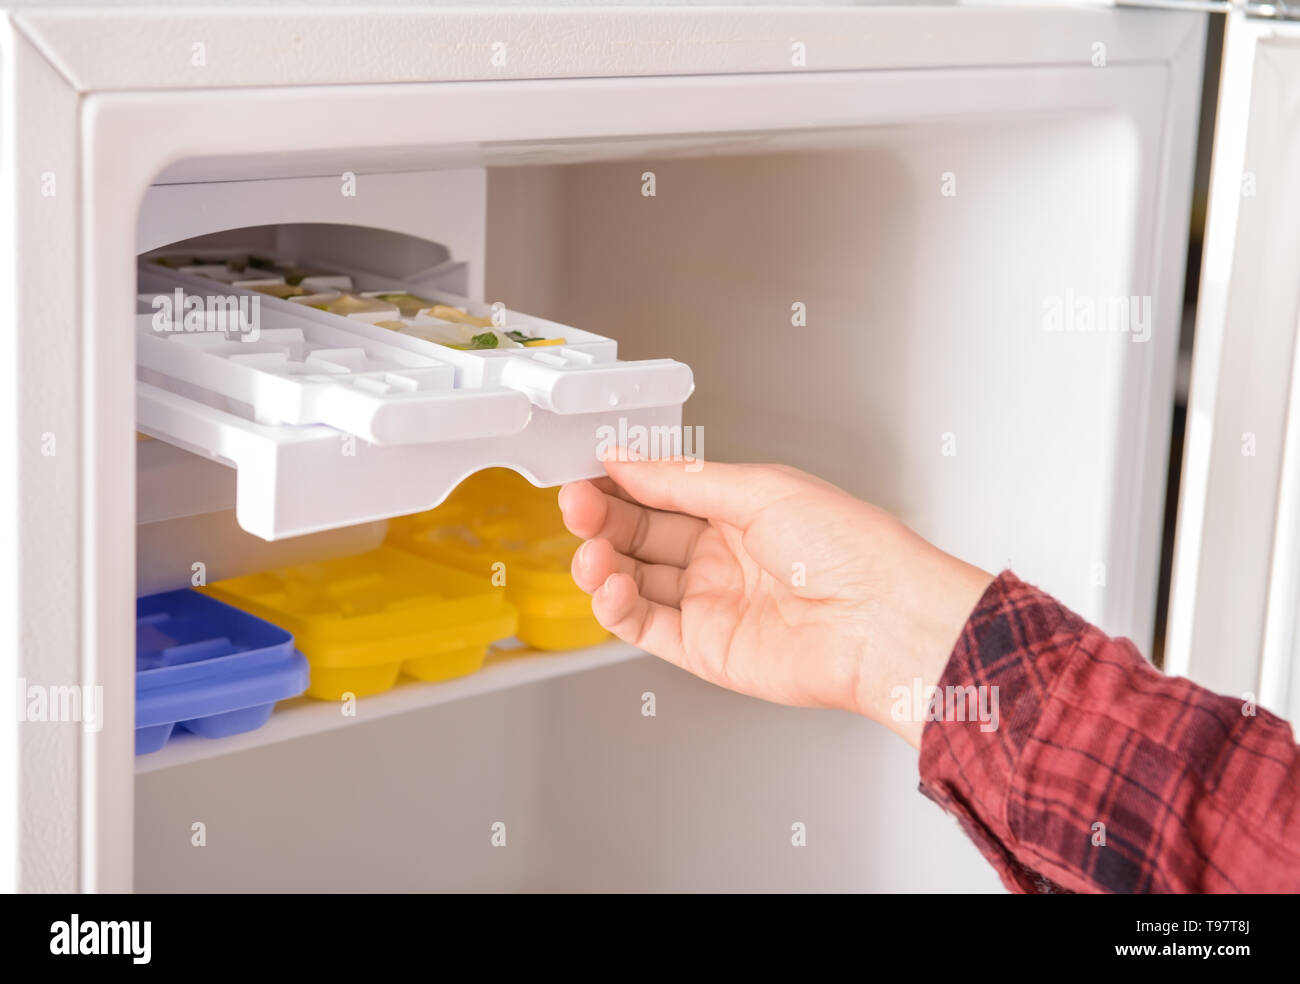 Woman putting tray with citrus fruits frozen in ice cubes into refrigerator  Stock Photo - Alamy